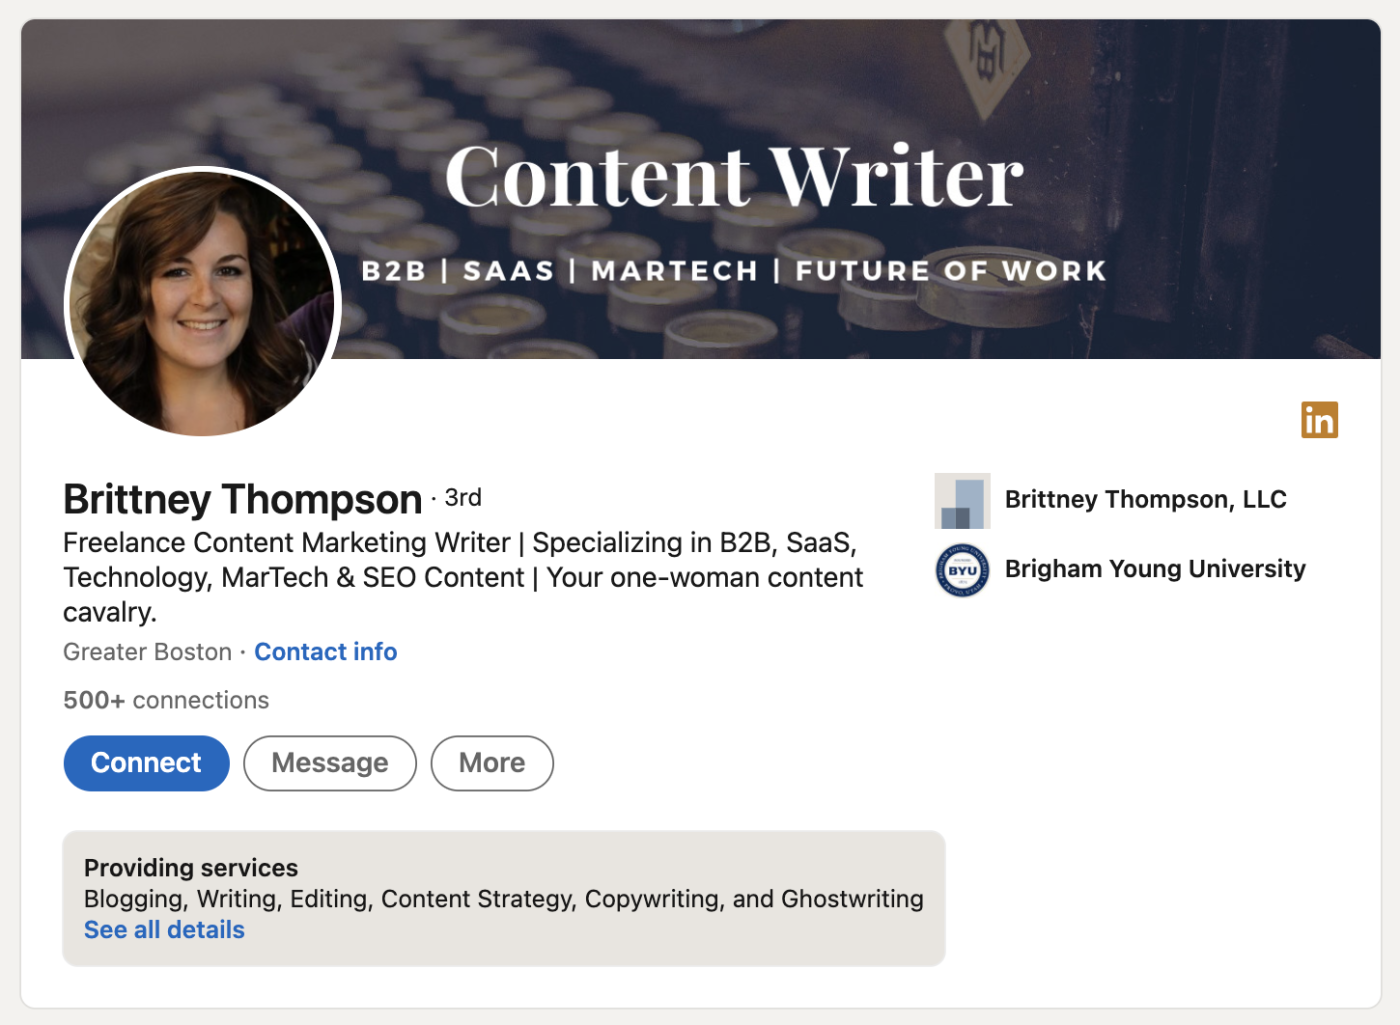 A screenshot of Brittney's LinkedIn profile, where she promotes her niche of B2B, SaaS, MarTech, and the Future of Work